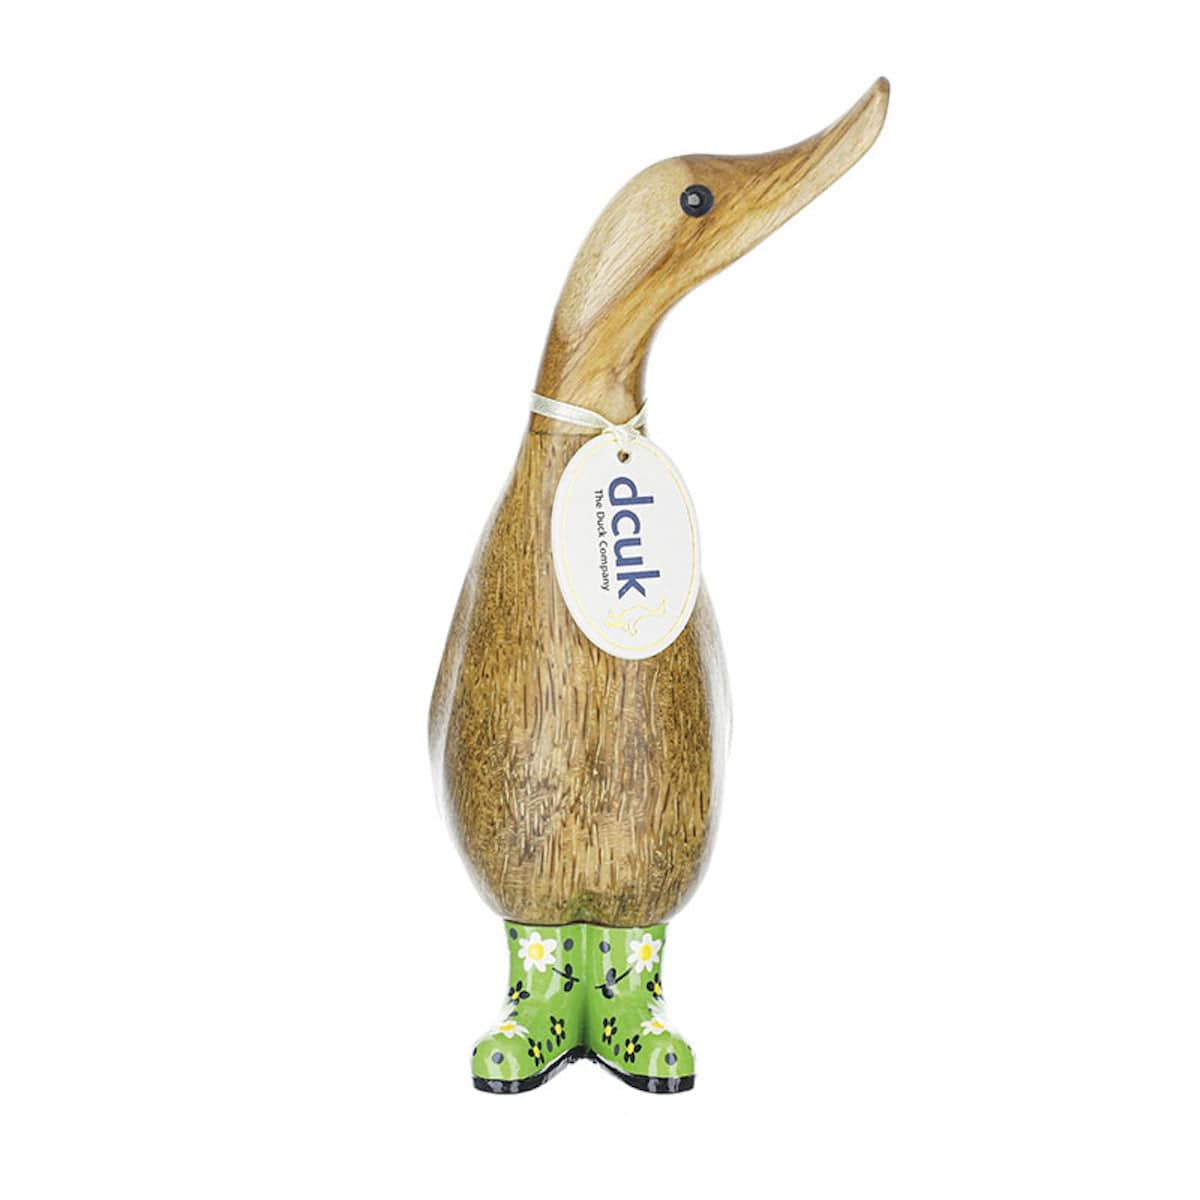 DCUK Ornaments Green Floral Welly Boots Wooden Ducklings - Choice of Colour